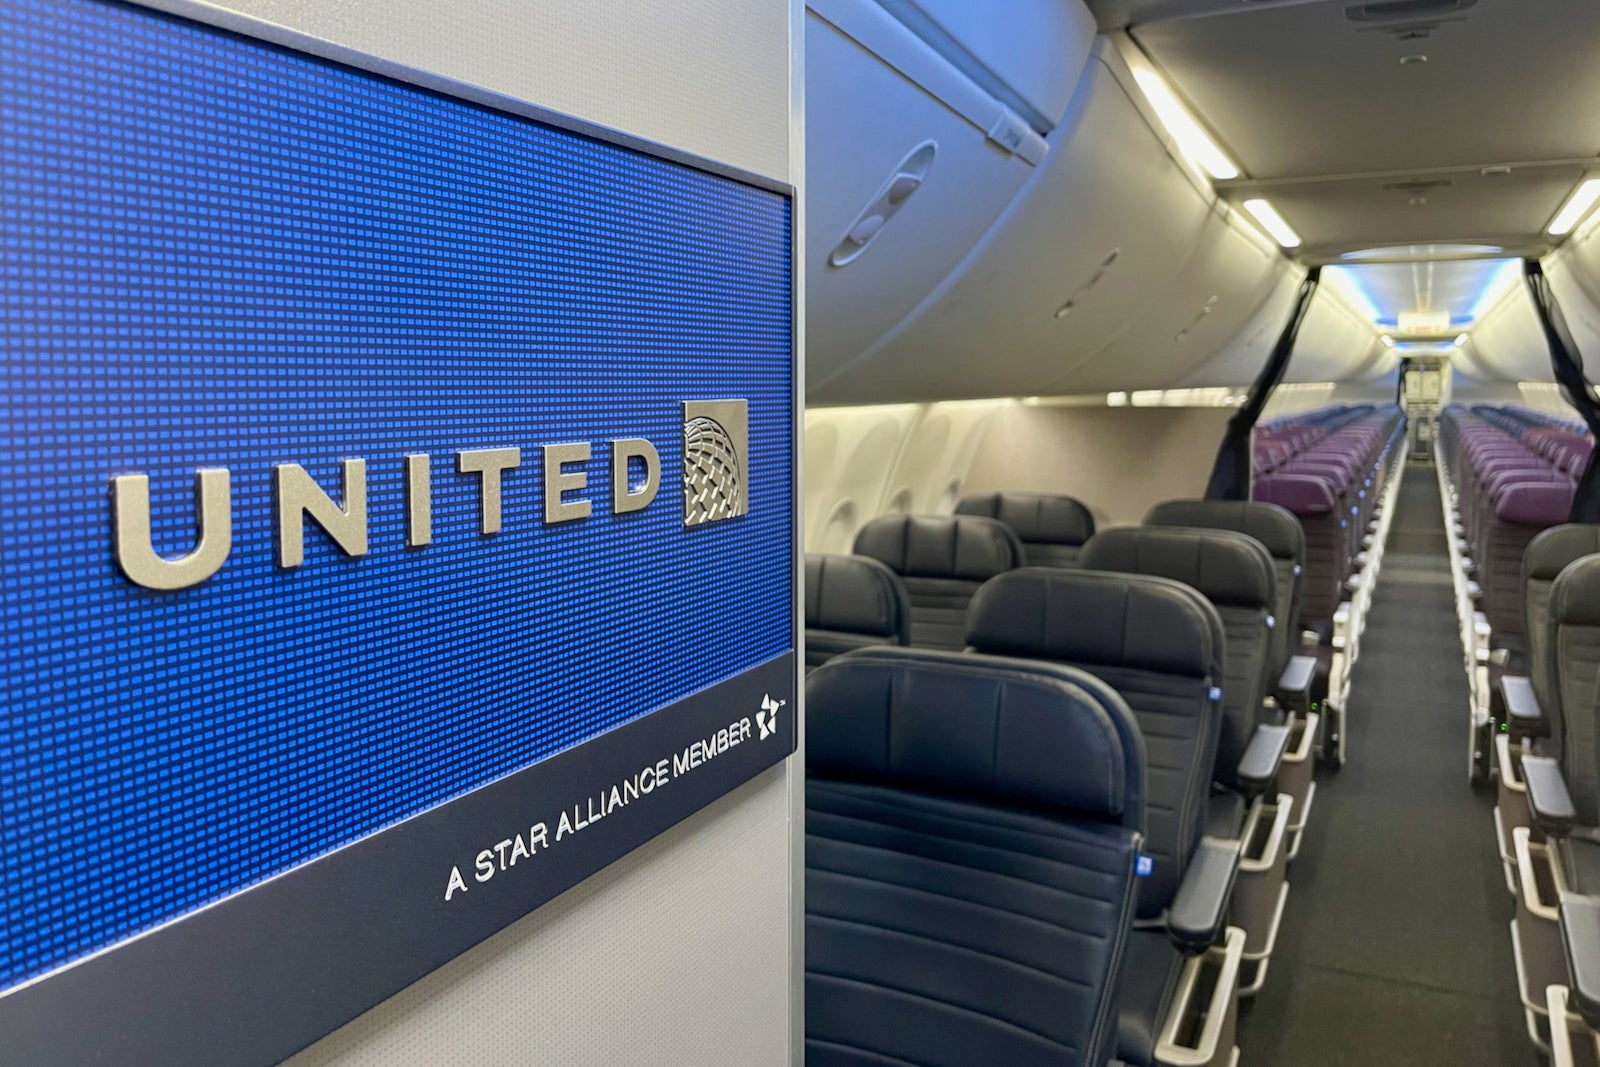 United is restoring liquor sales, shrugs off risk of unruly passengers